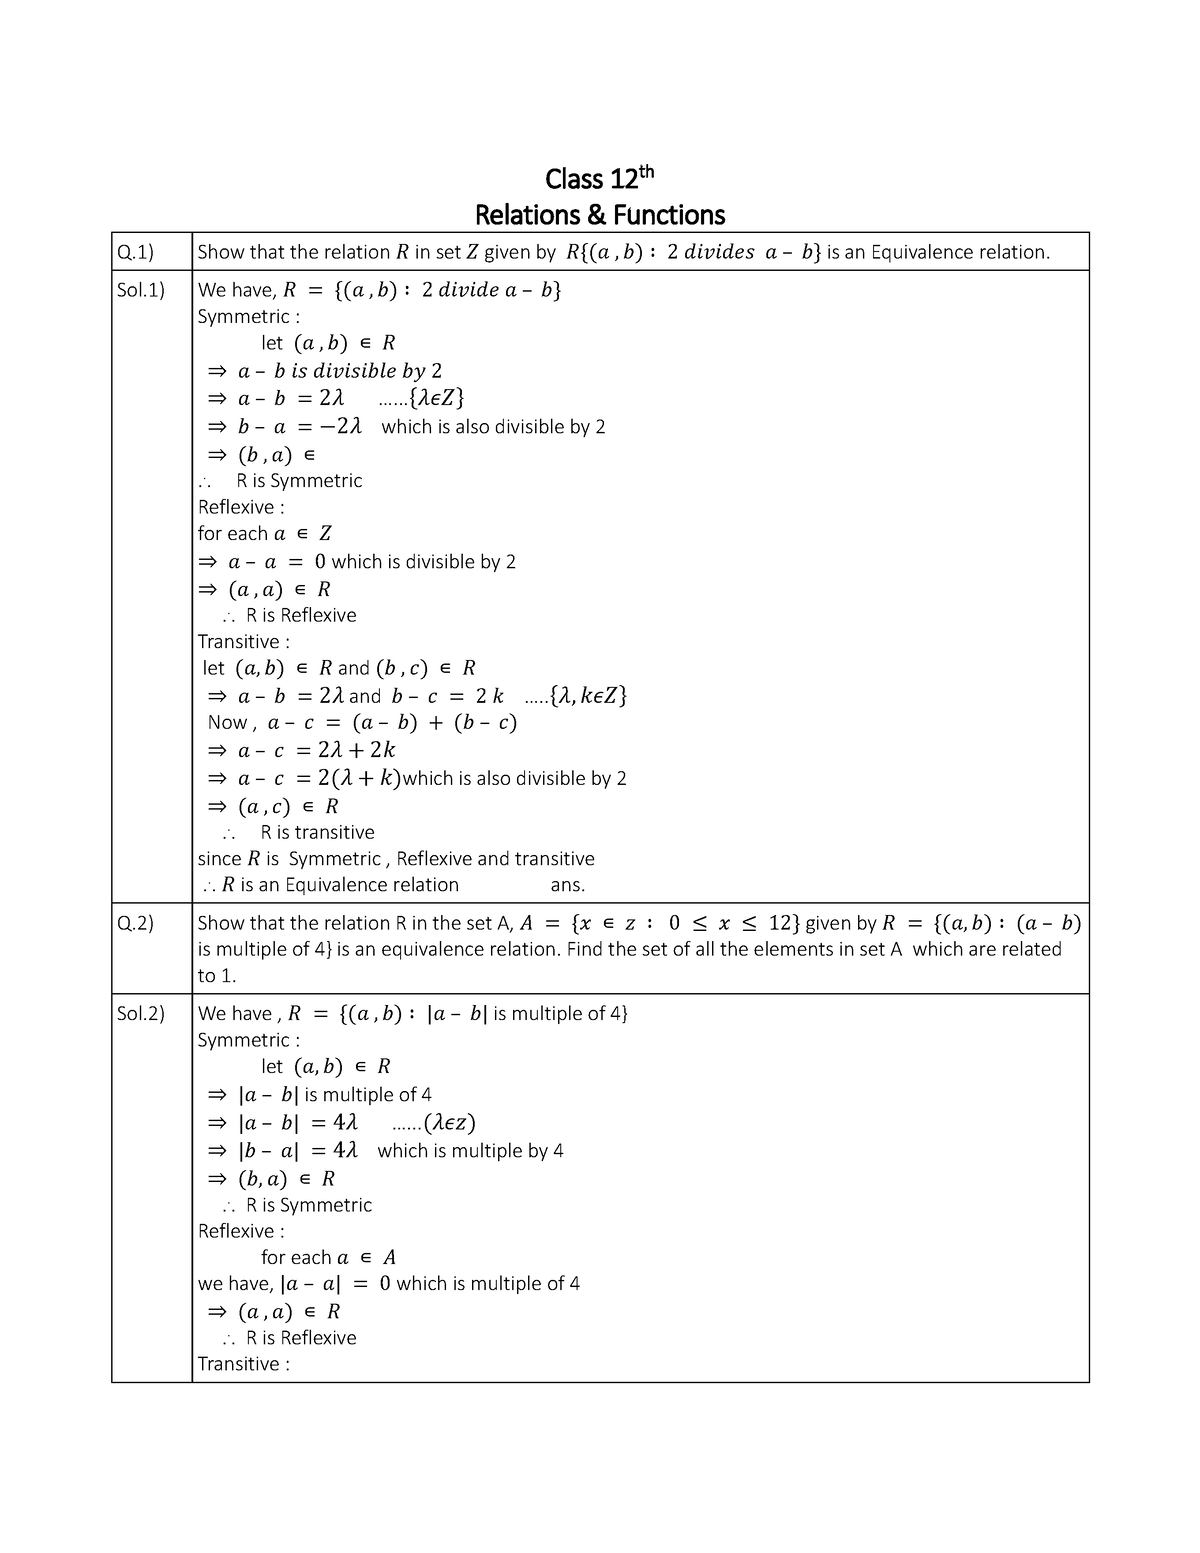 cbse-worksheets-for-class-12-maths-relations-and-functions-assignment